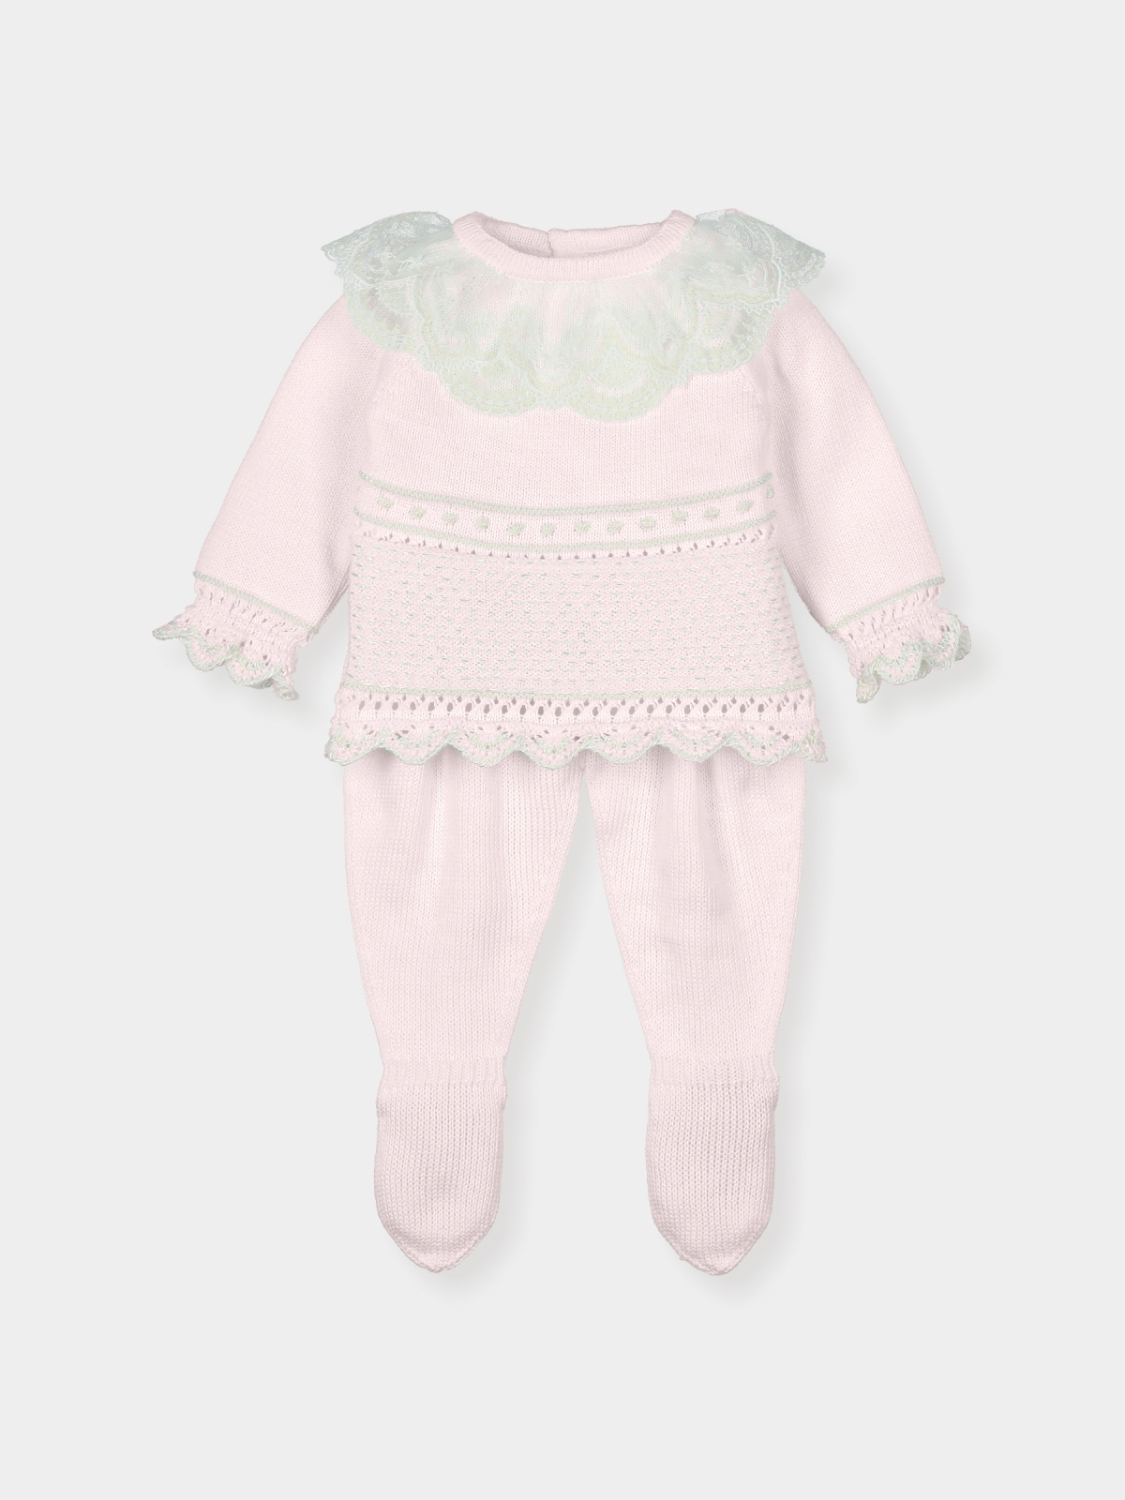 Baby pink Lace collor outfit